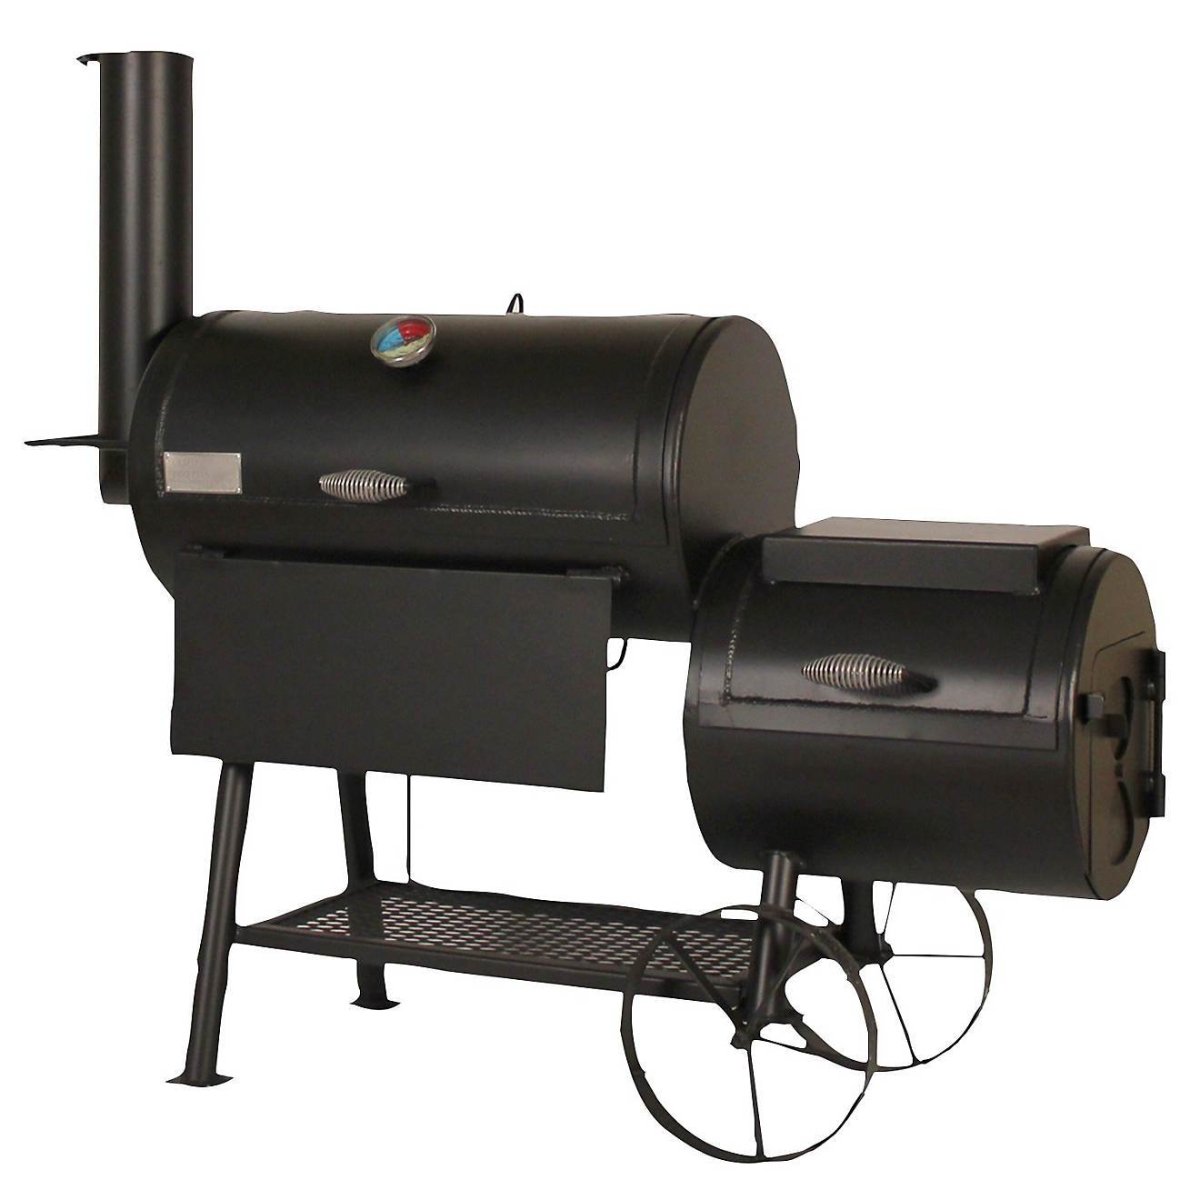 Old Country BBQ Pits All American Brazos Smoker - Shipped and Crated - Texas Star Grill Shop OCG-20*60